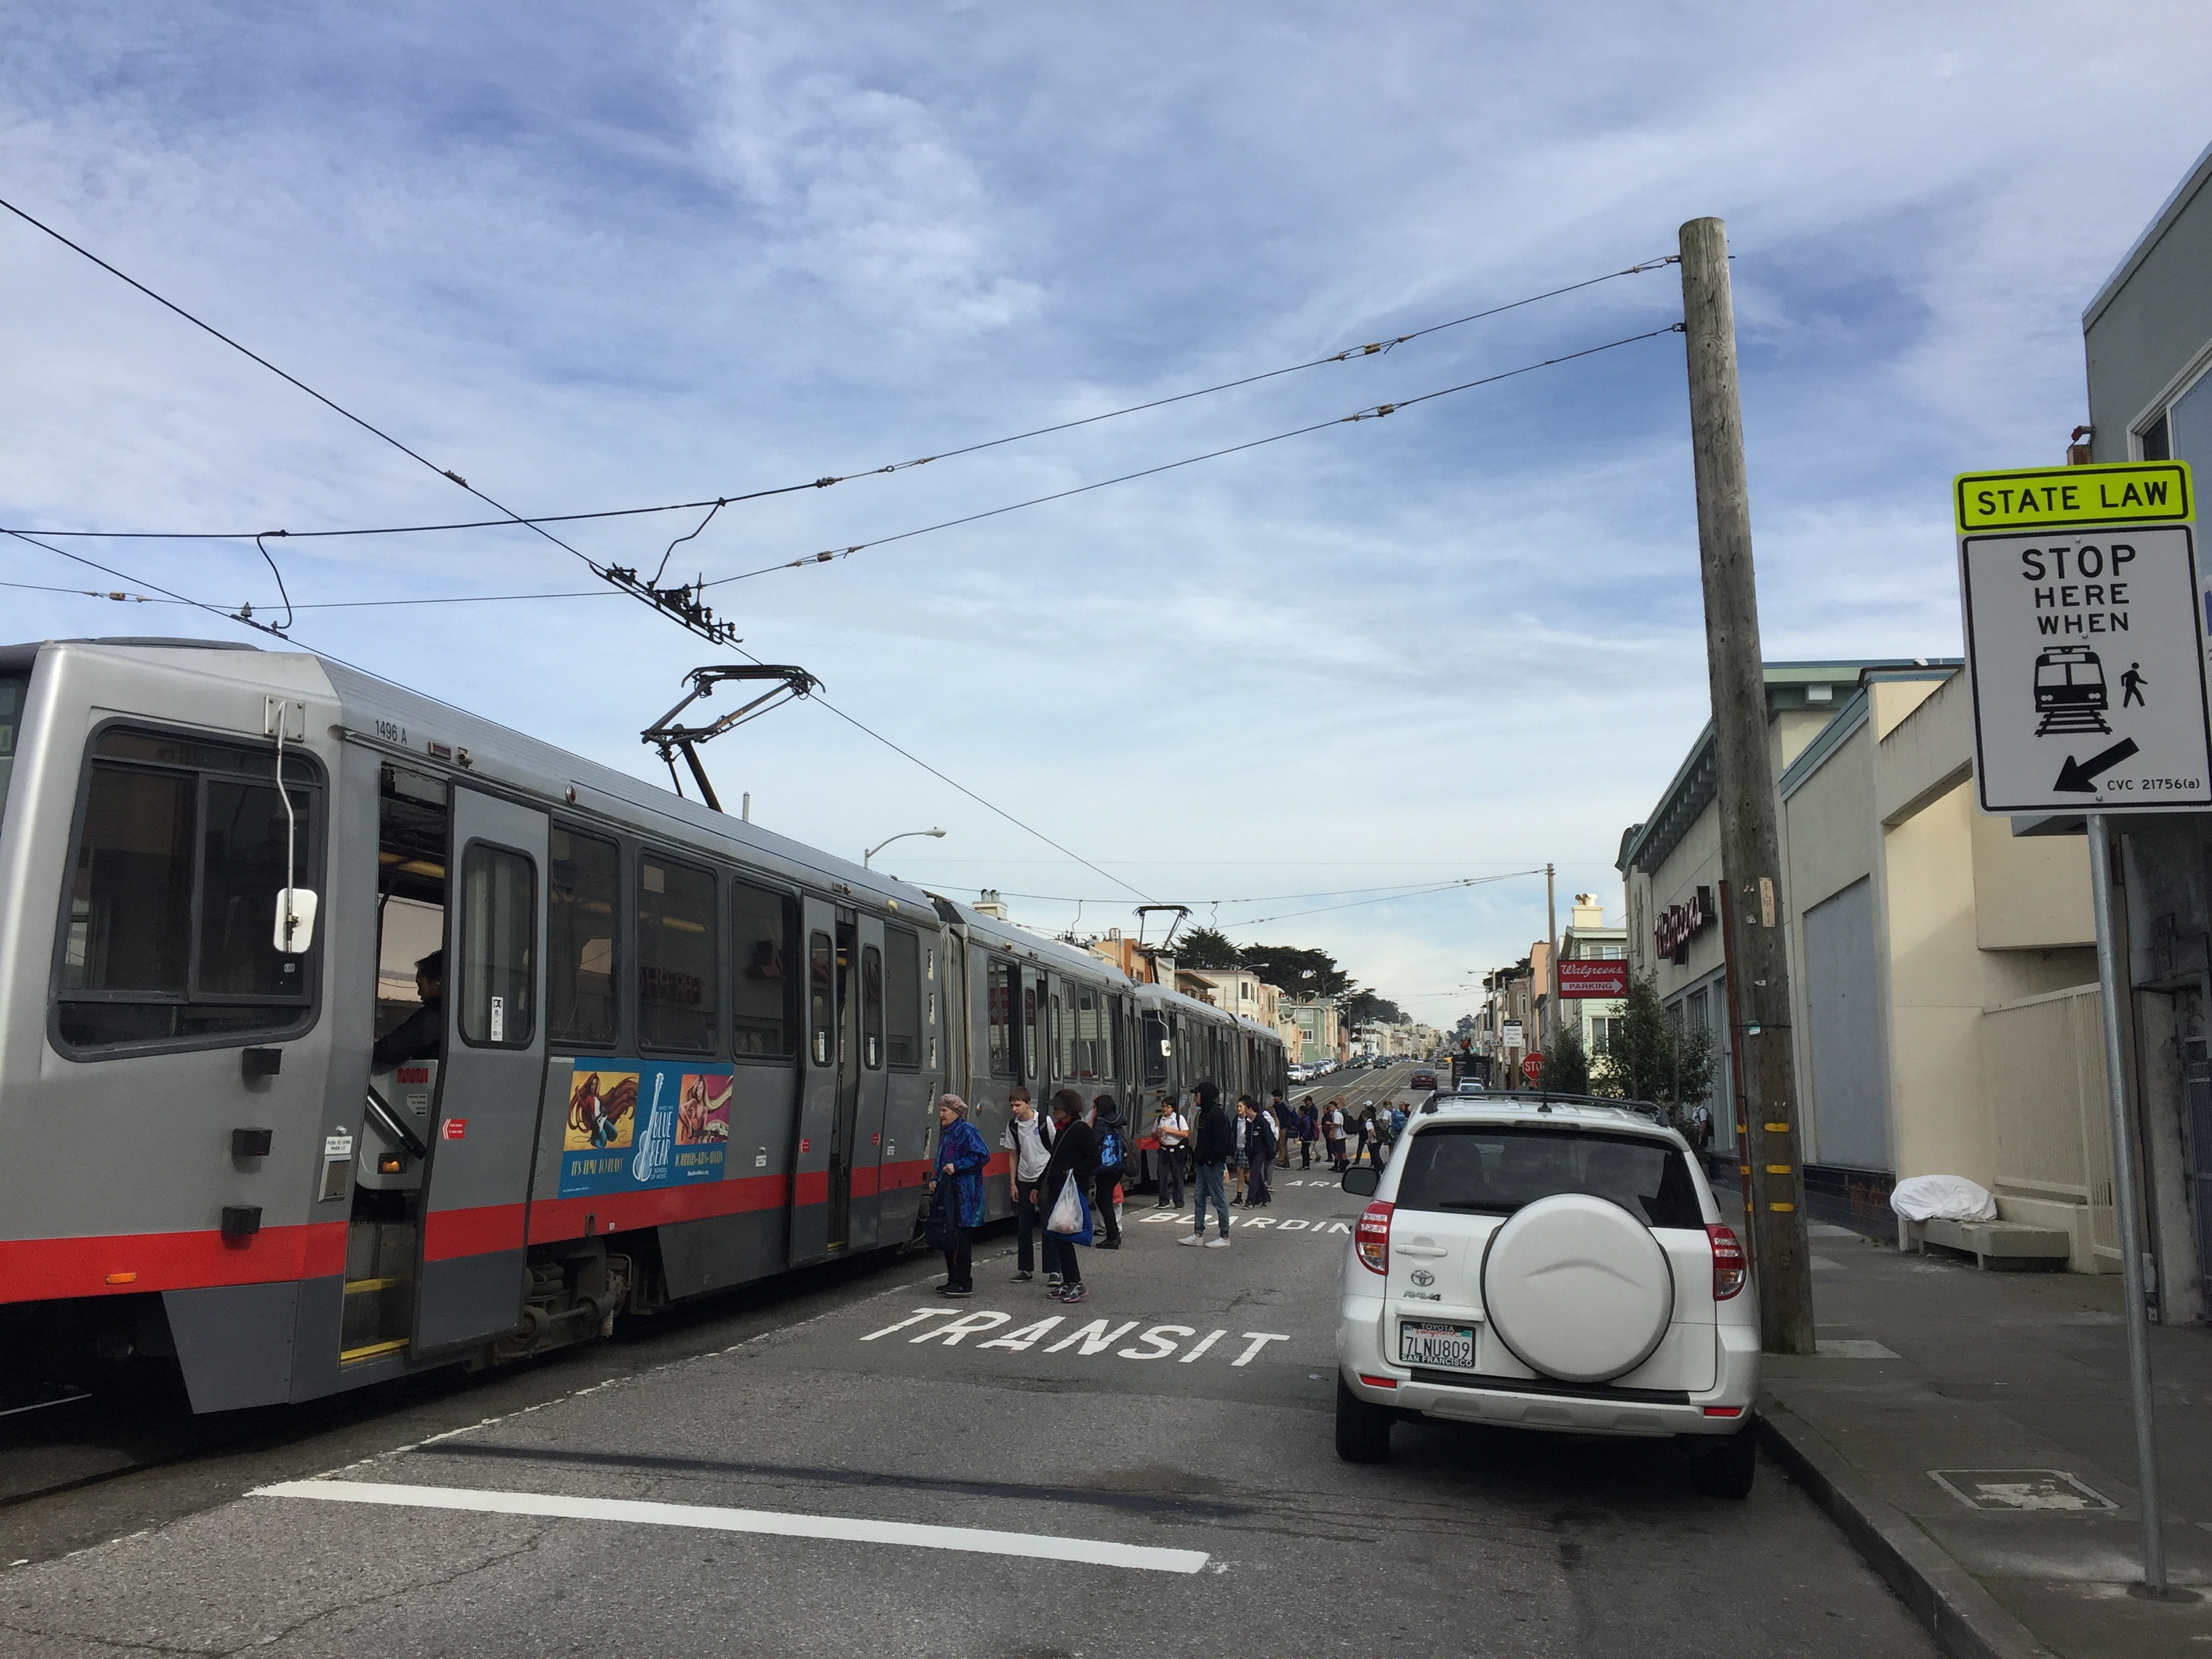 Pilot boarding zone on Taraval at 22nd